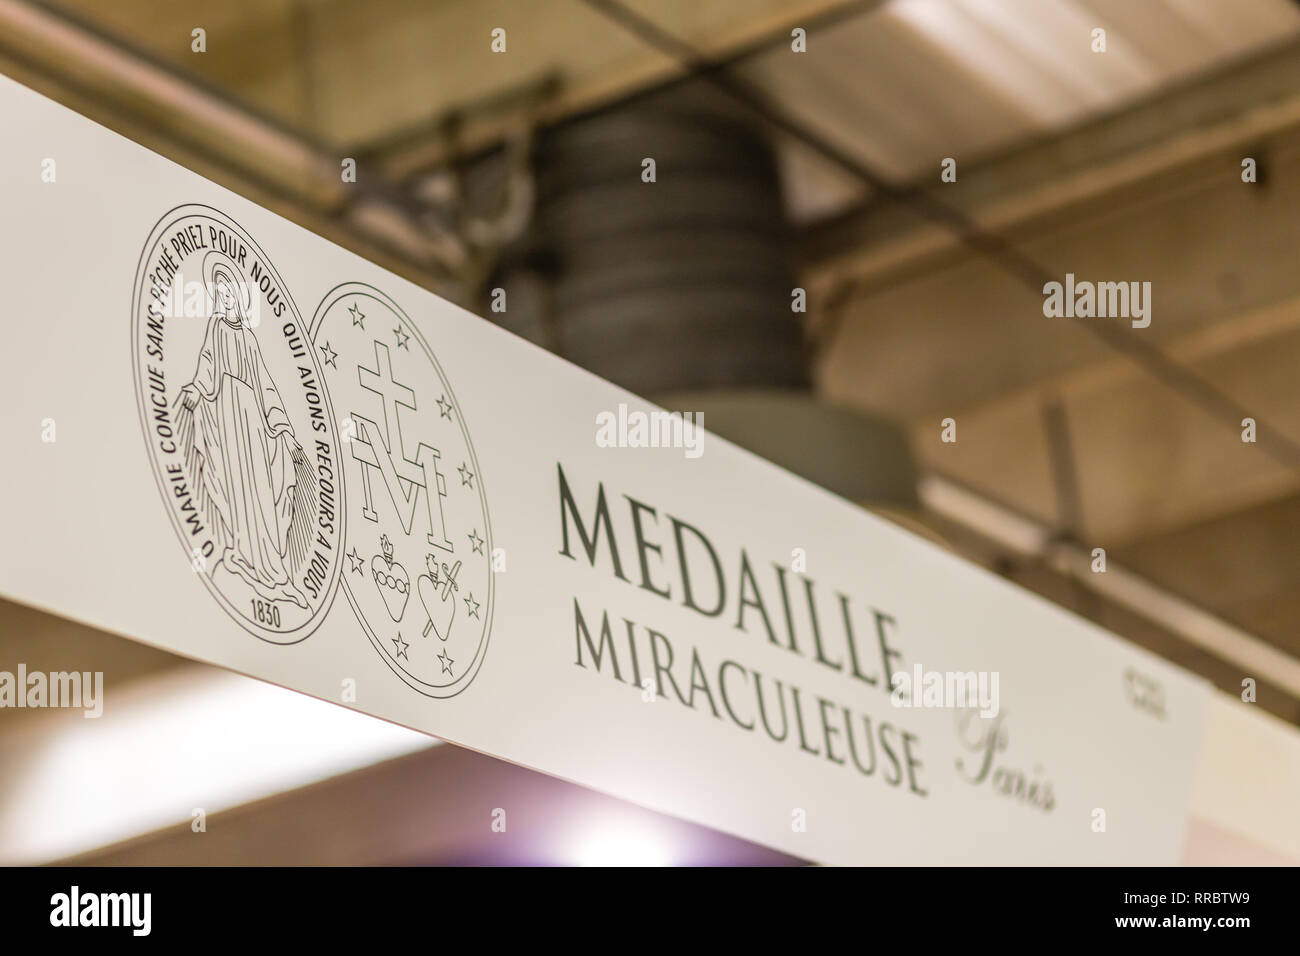 BOLOGNA, ITALY - FEBRUARY 18, 2019: lights are enlightening  MEDAILLE MIRACULEUSE logo on signboard on stand in DEVOTIO Religious products and service Stock Photo